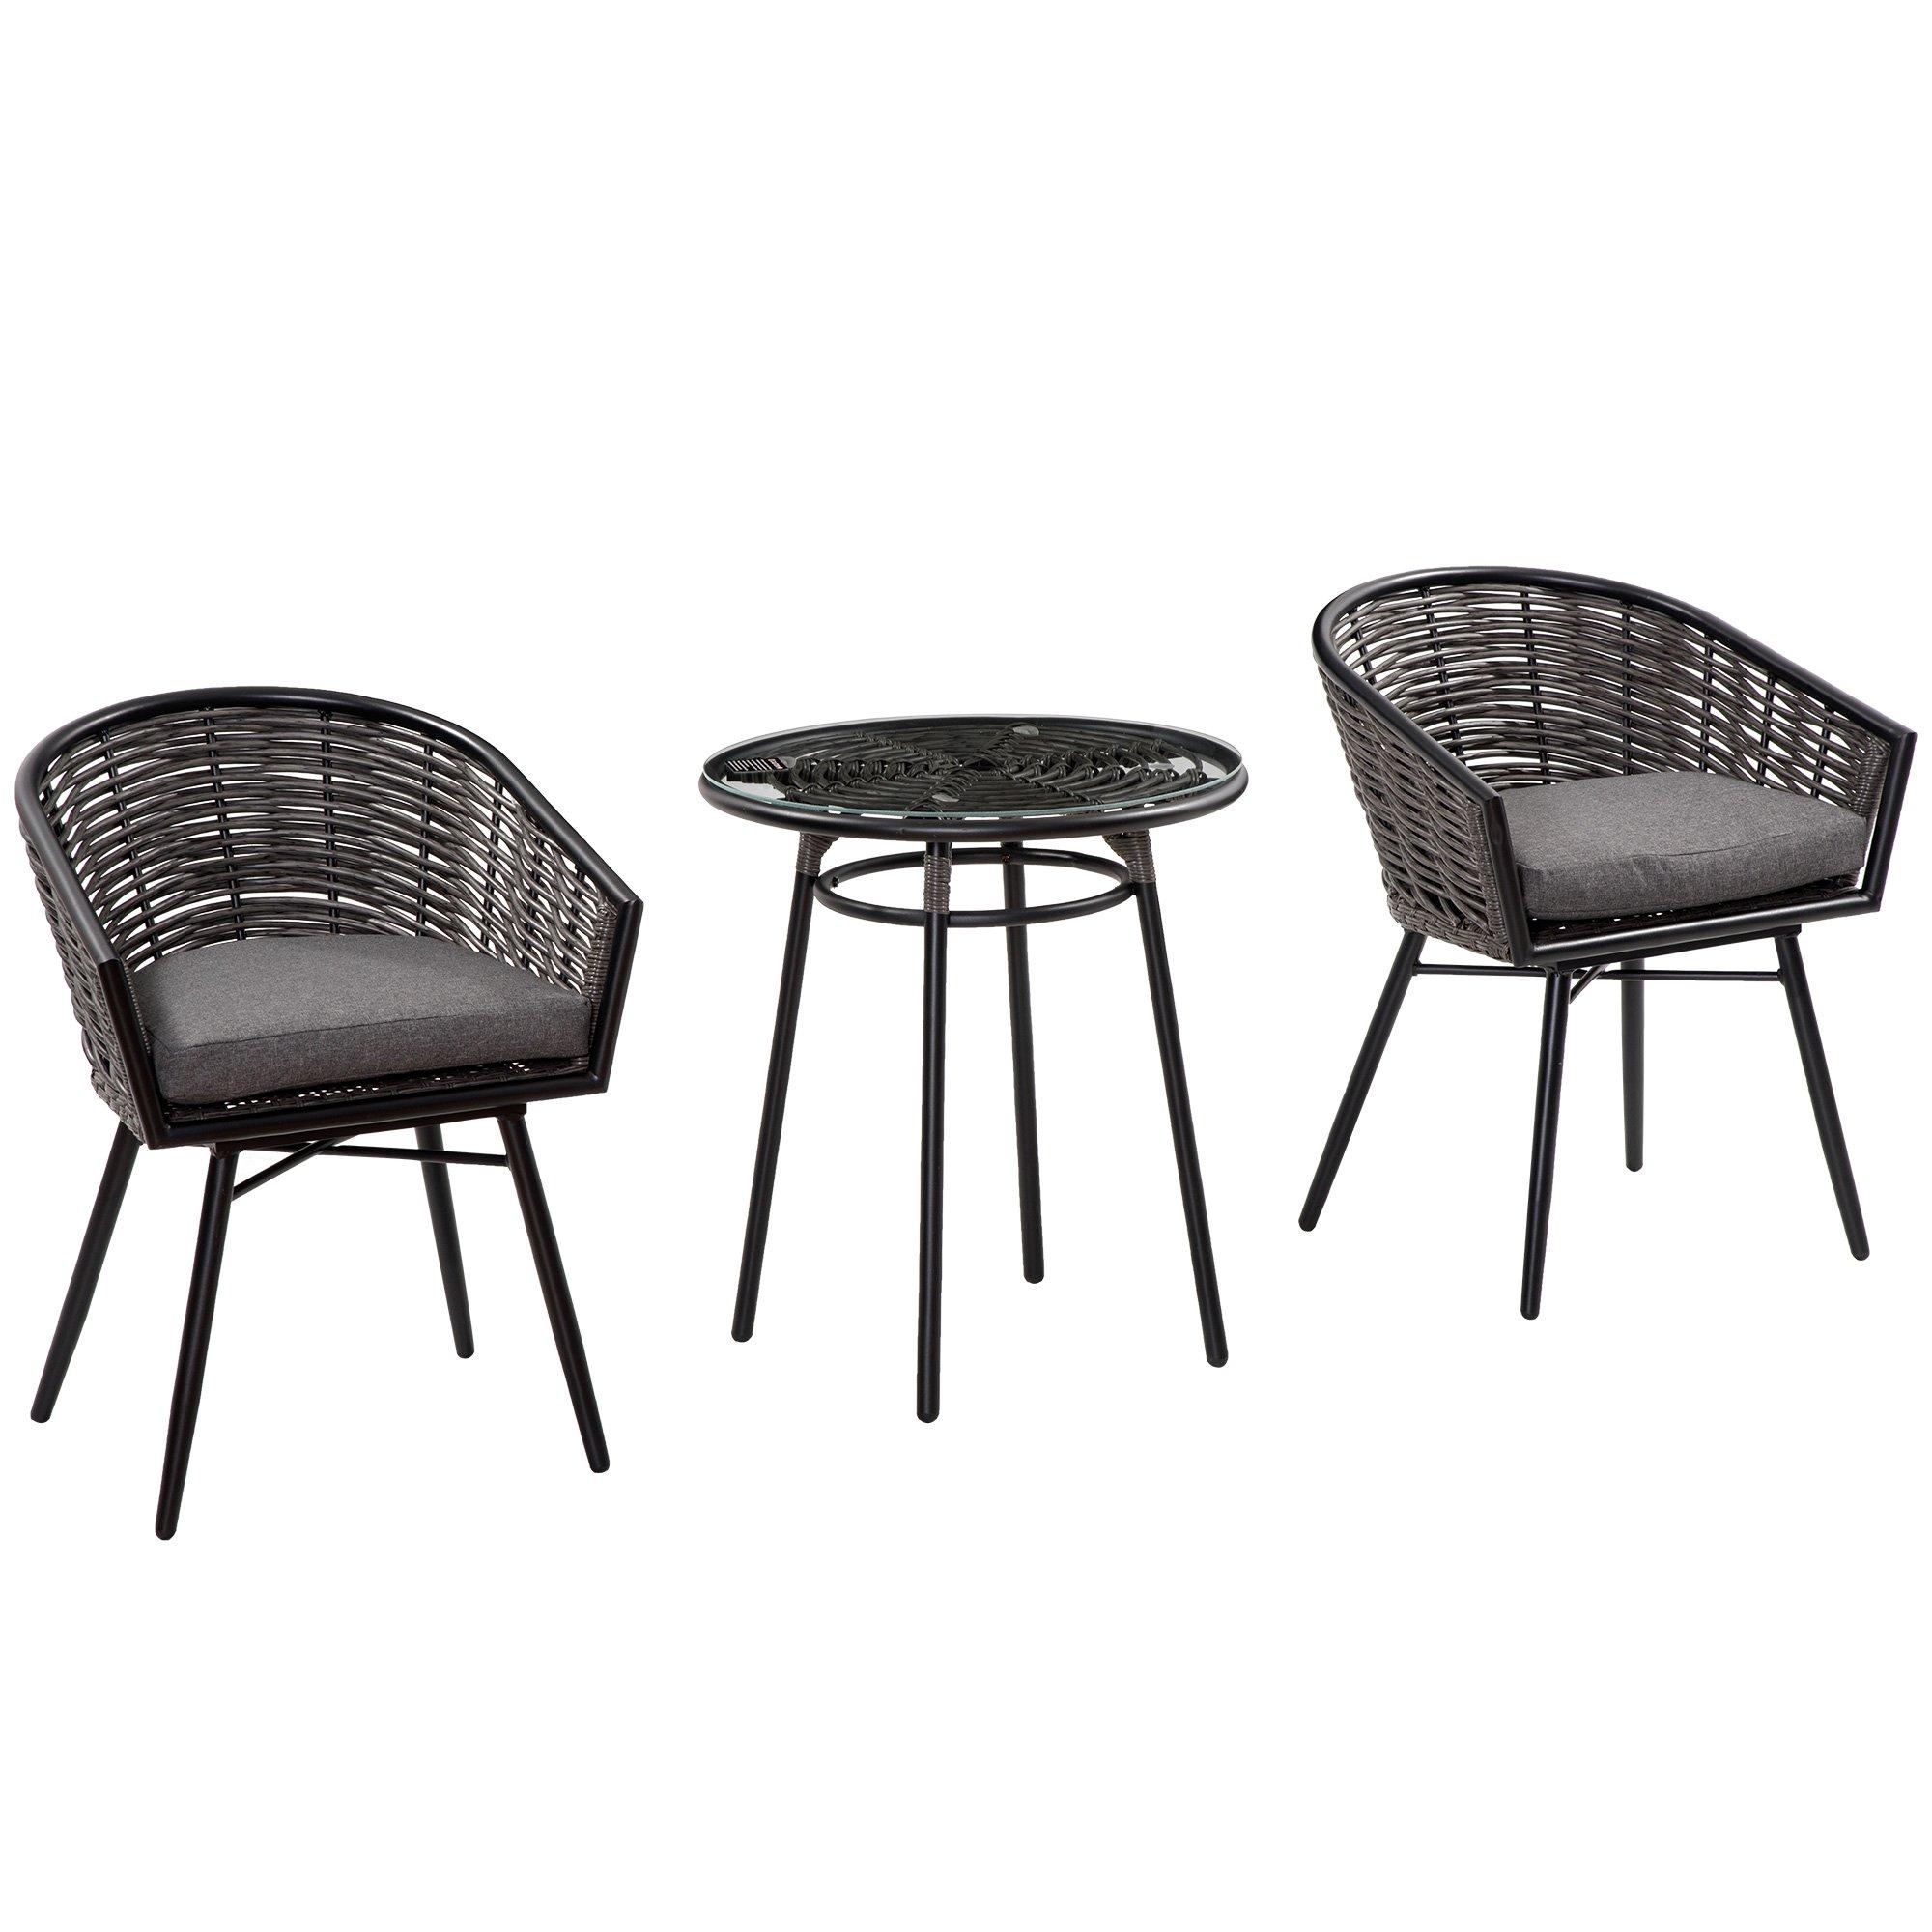 3 PCS Patio Resin Wicker Bistro Set w/ 2 Chairs & 1 Coffee Table for Garden